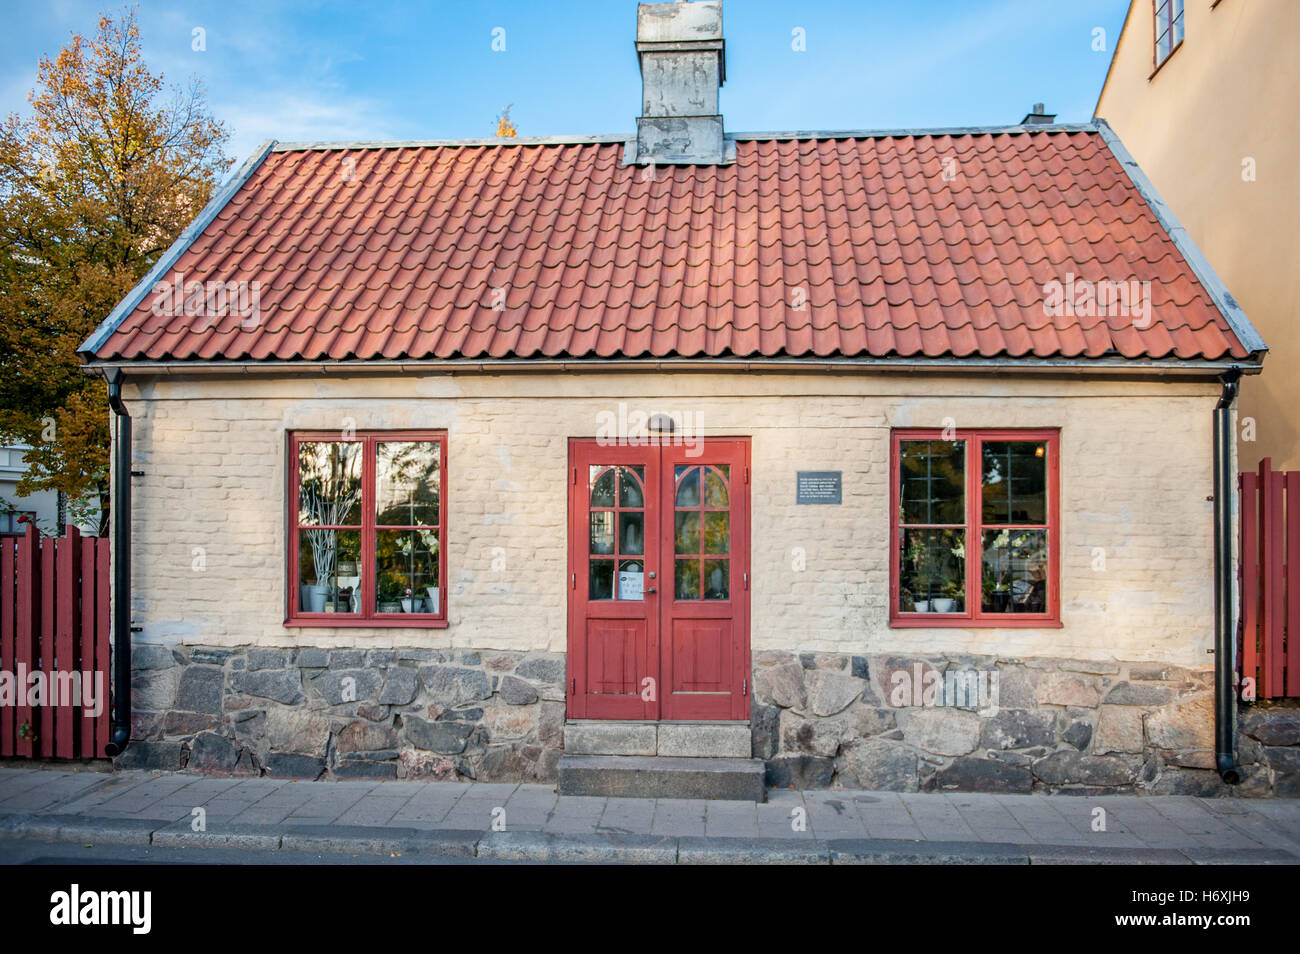 'The last drink' an old pharmacy dating back to 1760. Norrkoping is a historic industrial town in Sweden. Stock Photo